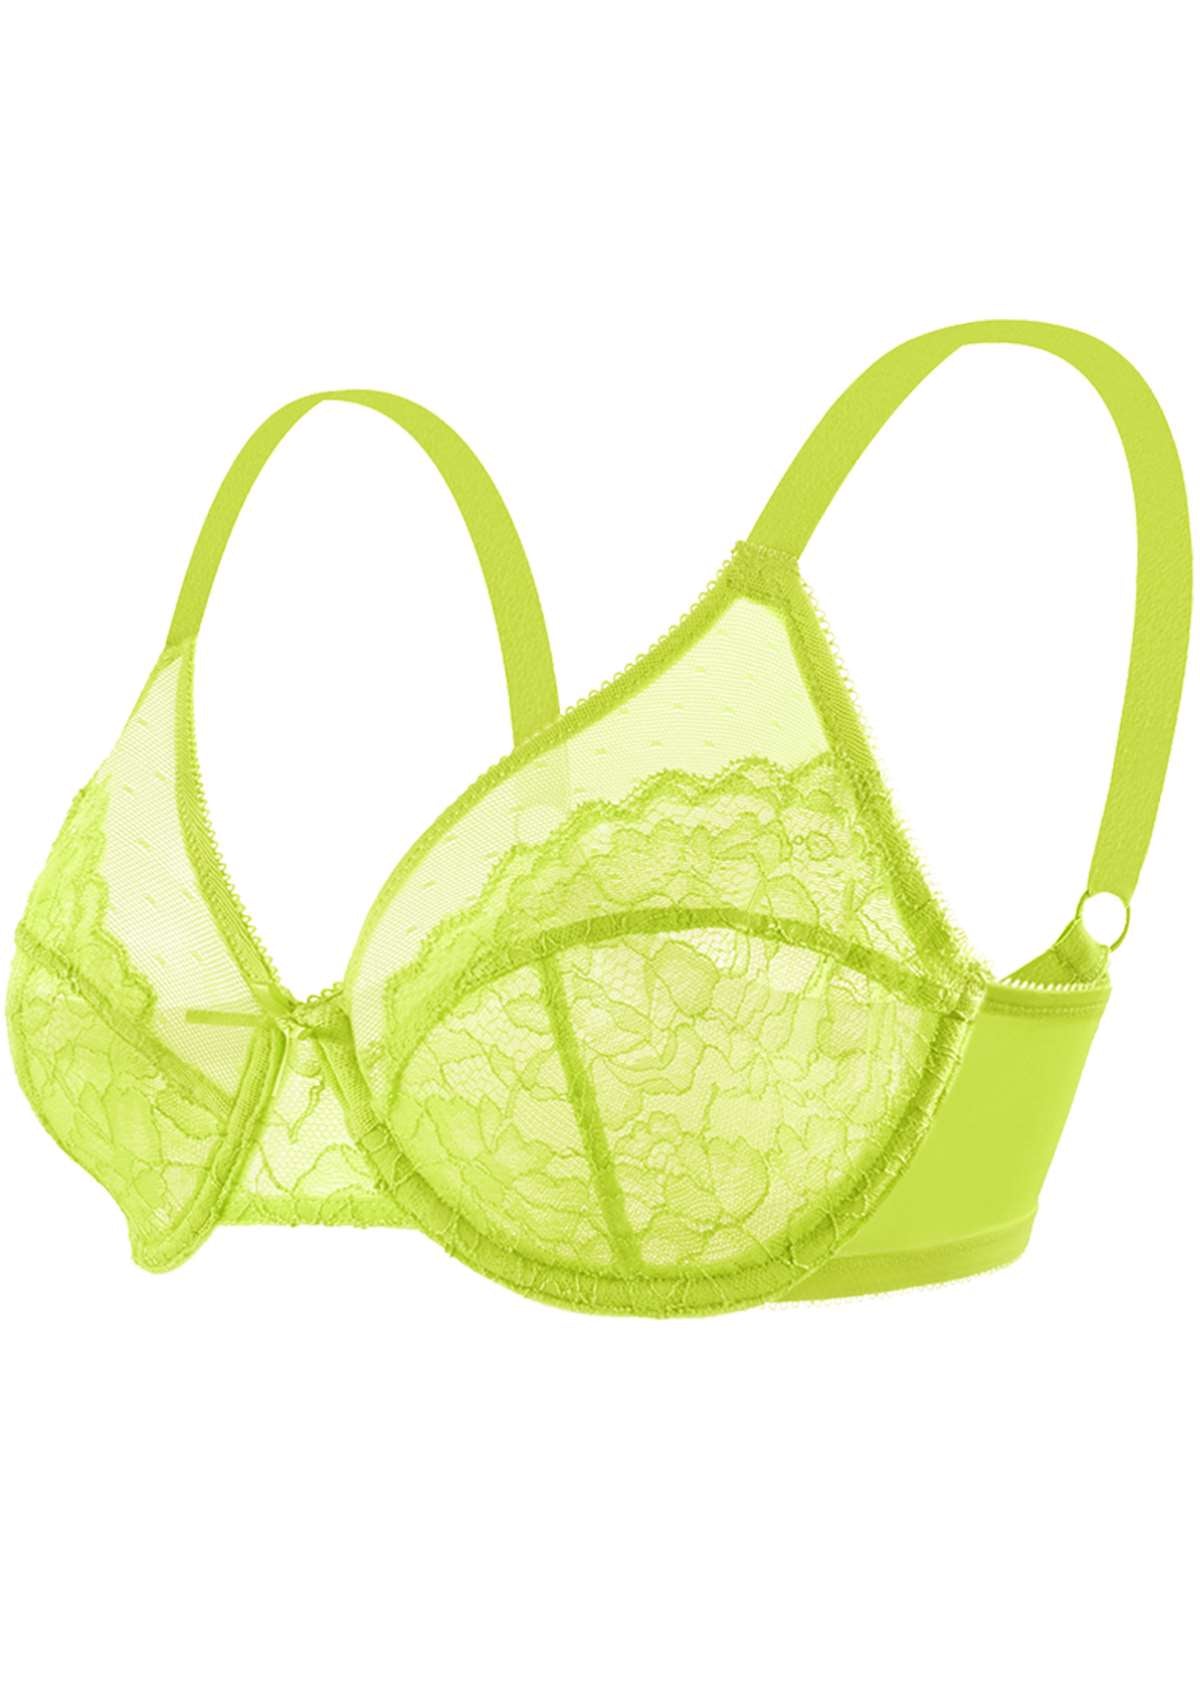 HSIA Enchante Full Cup Minimizing Bra: Supportive Unlined Lace Bra - Lime Green / 42 / H